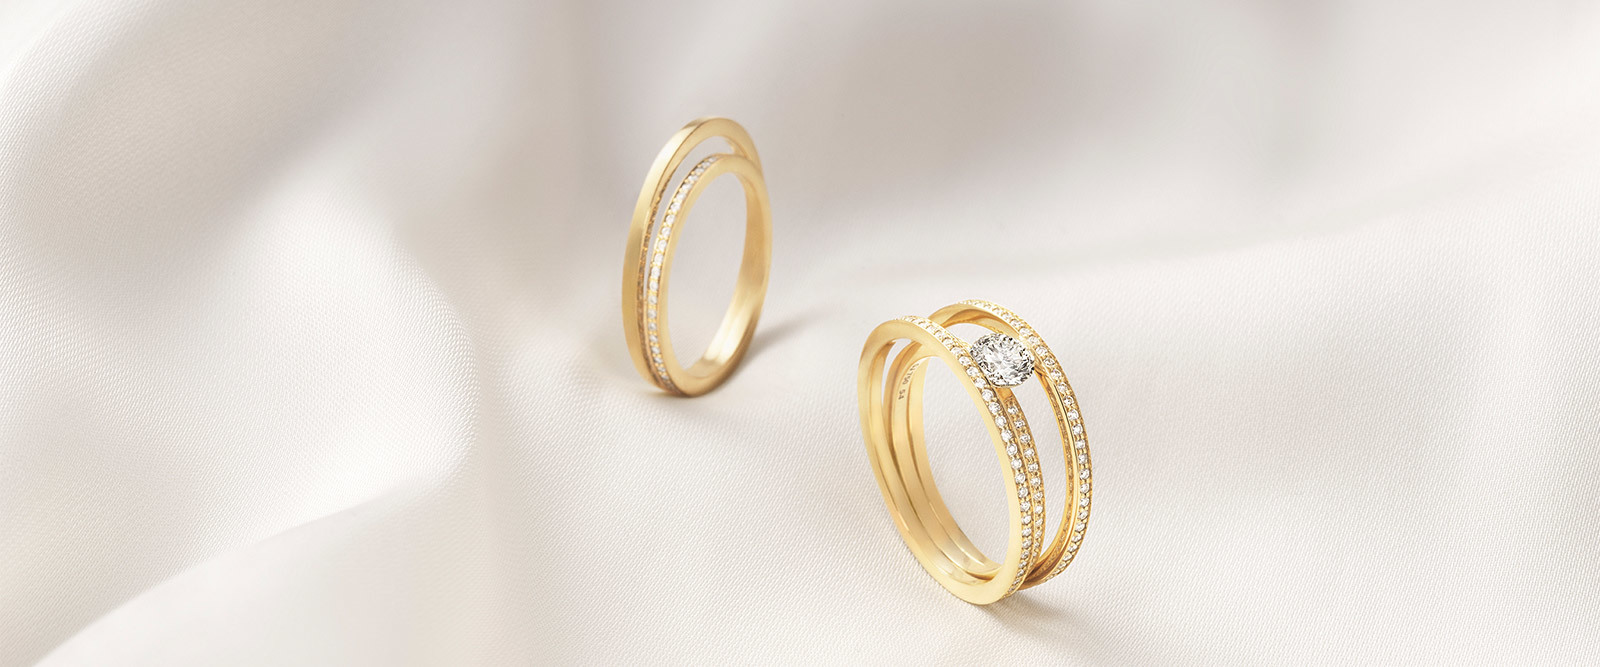 Gold and Silver Diamond Rings for Women | Georg Jensen